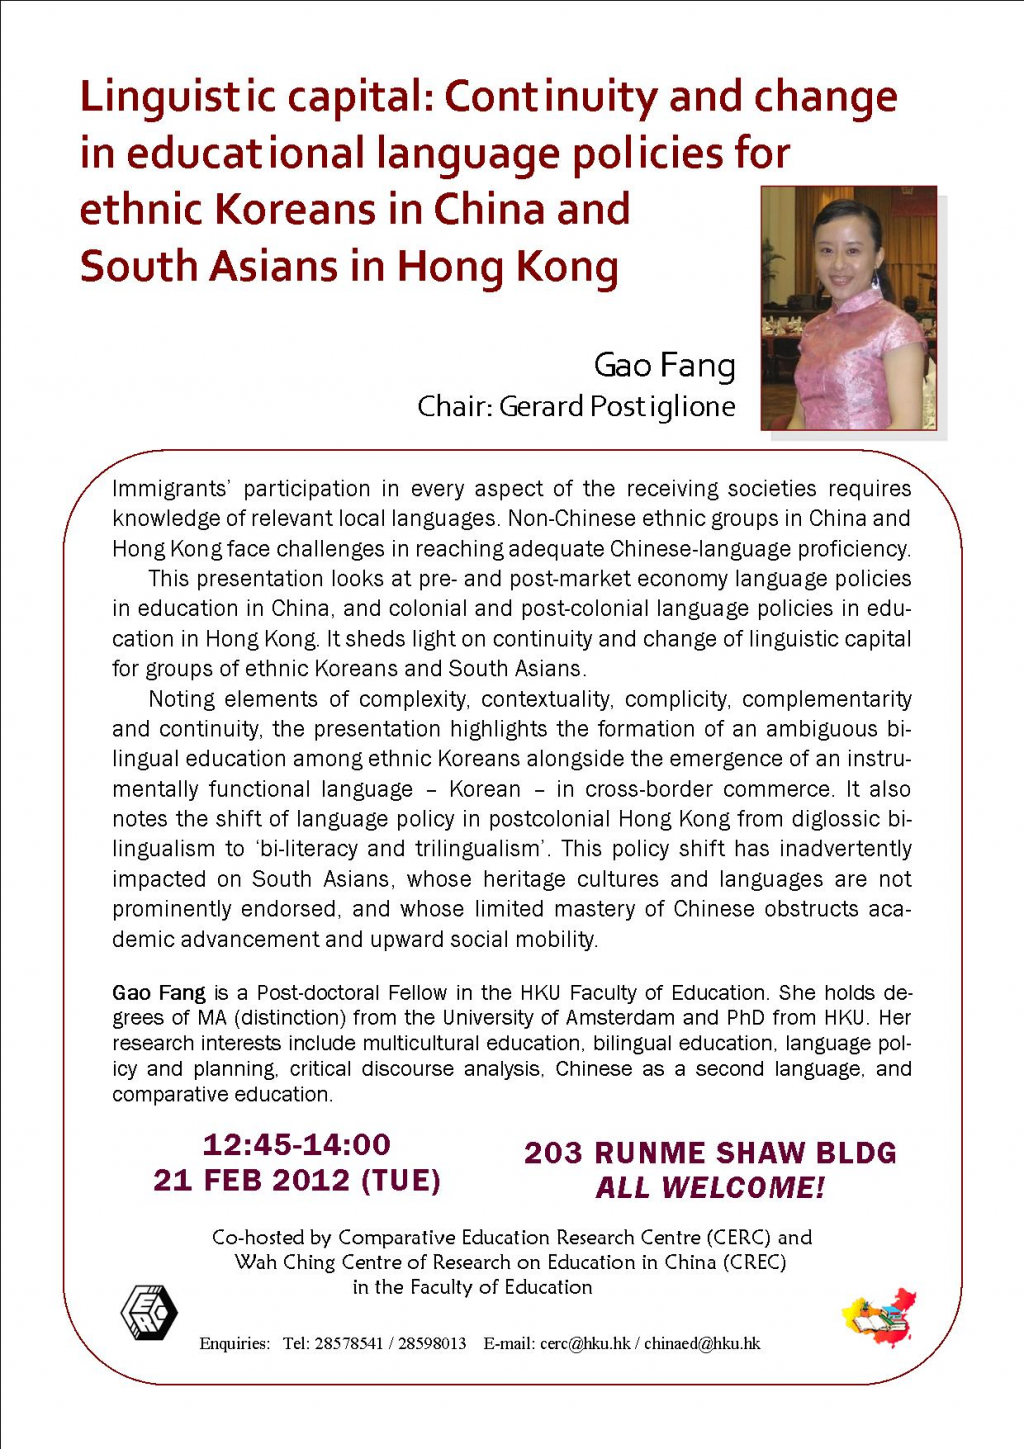 Seminar: Linguistic capital: Continuity and change in educational language policies for ethnic Koreans in China and South Asians in Hong Kong